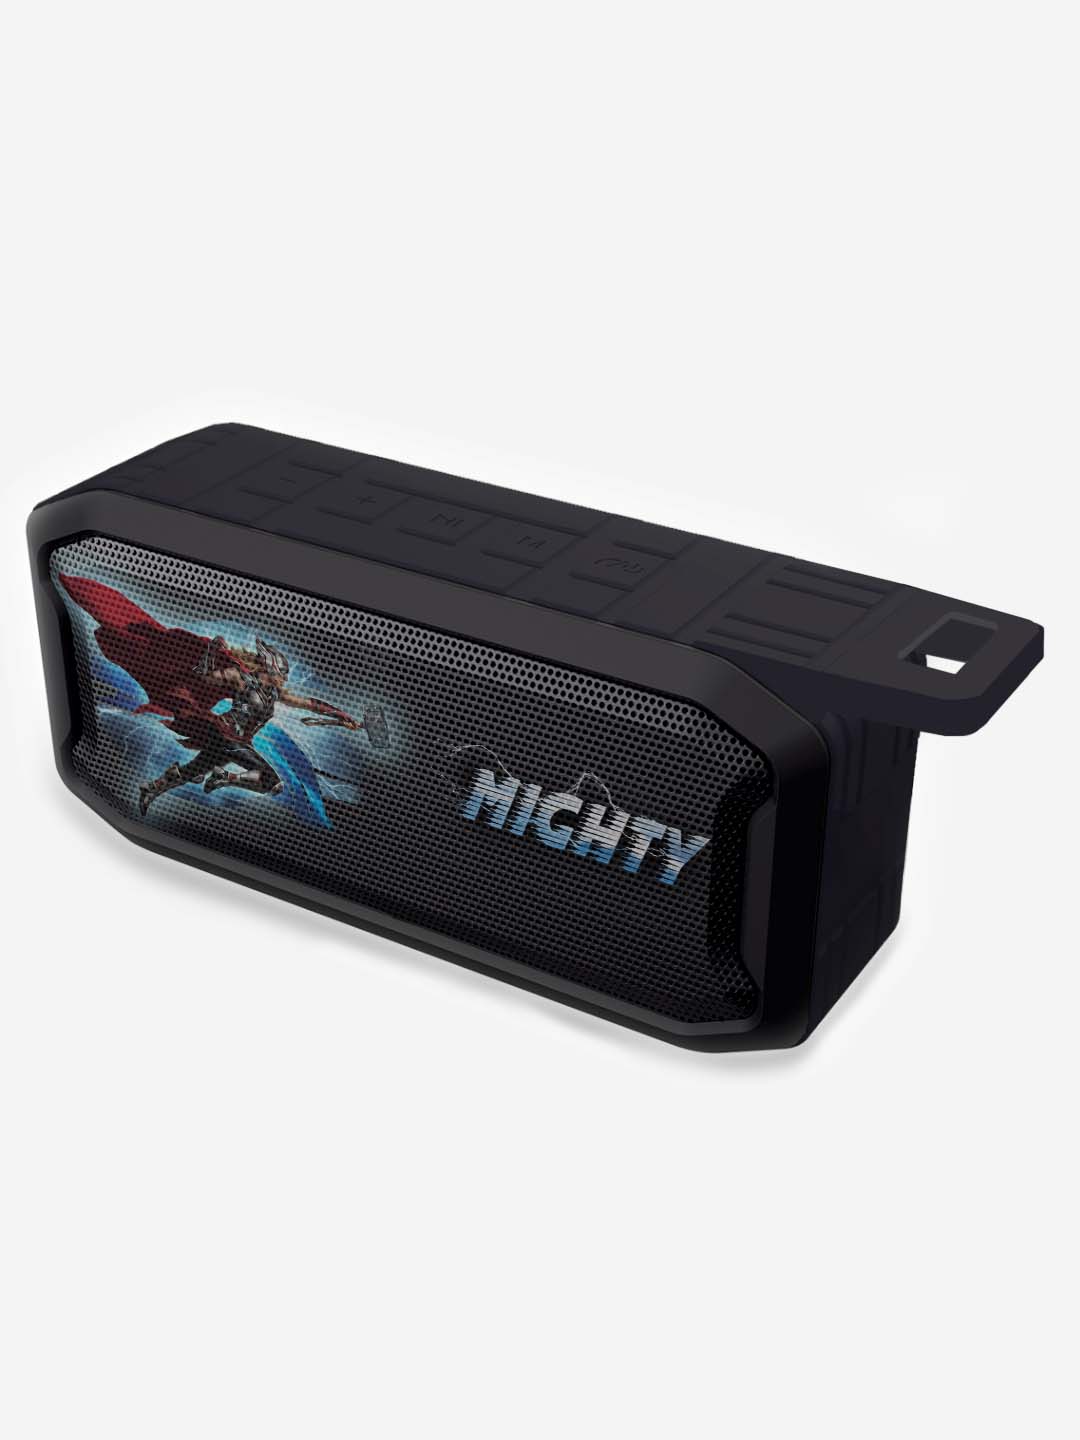 Buy Mighty Thor Attack - Macmerise Melody Bluetooth Speaker Speakers Online